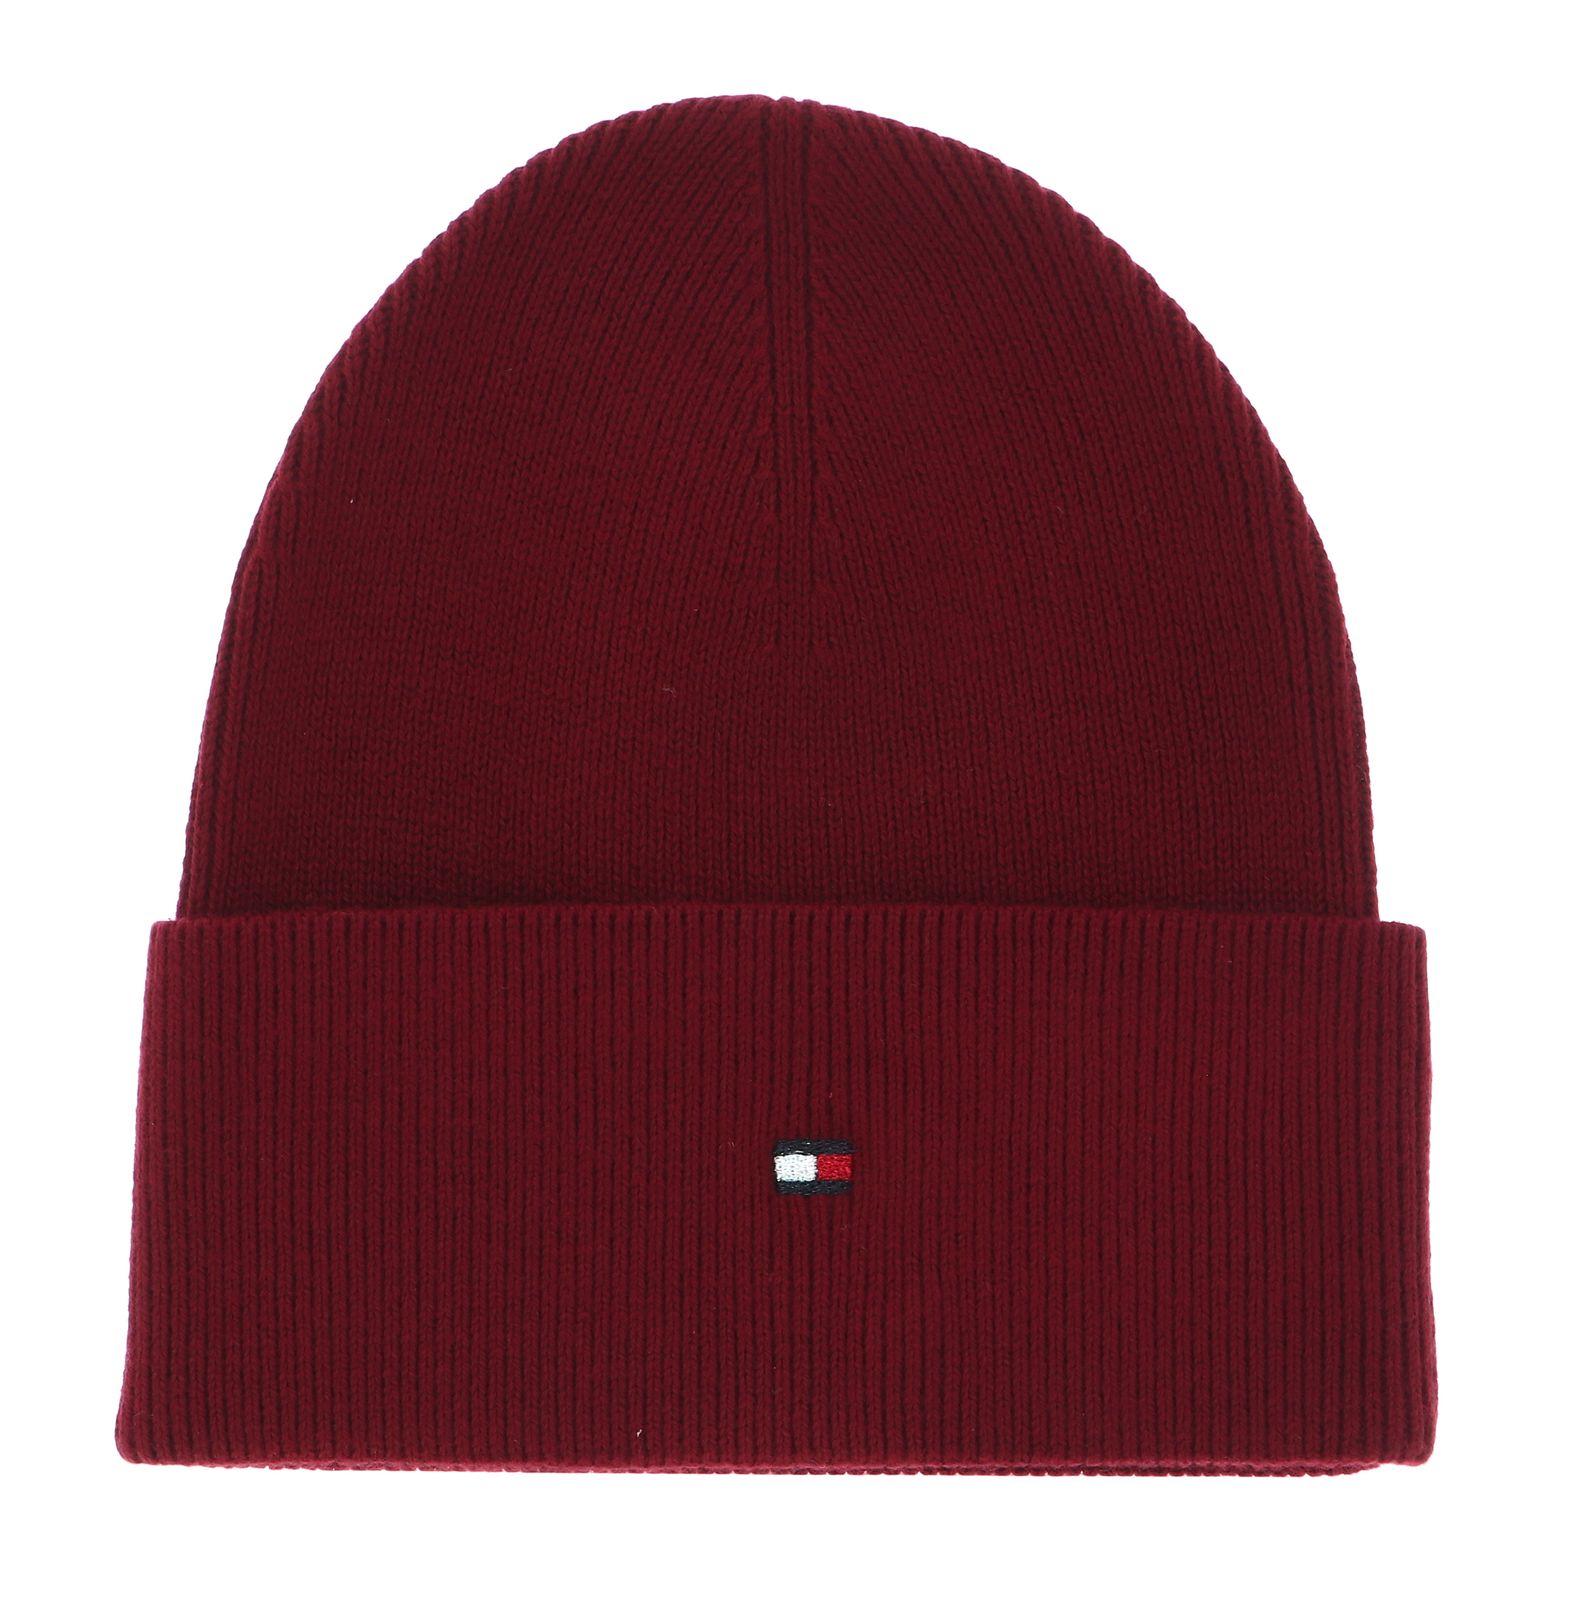 Beanie TOMMY modeherz cap online & bags, Flag Buy Rouge accessories | purses Essential HILFIGER |